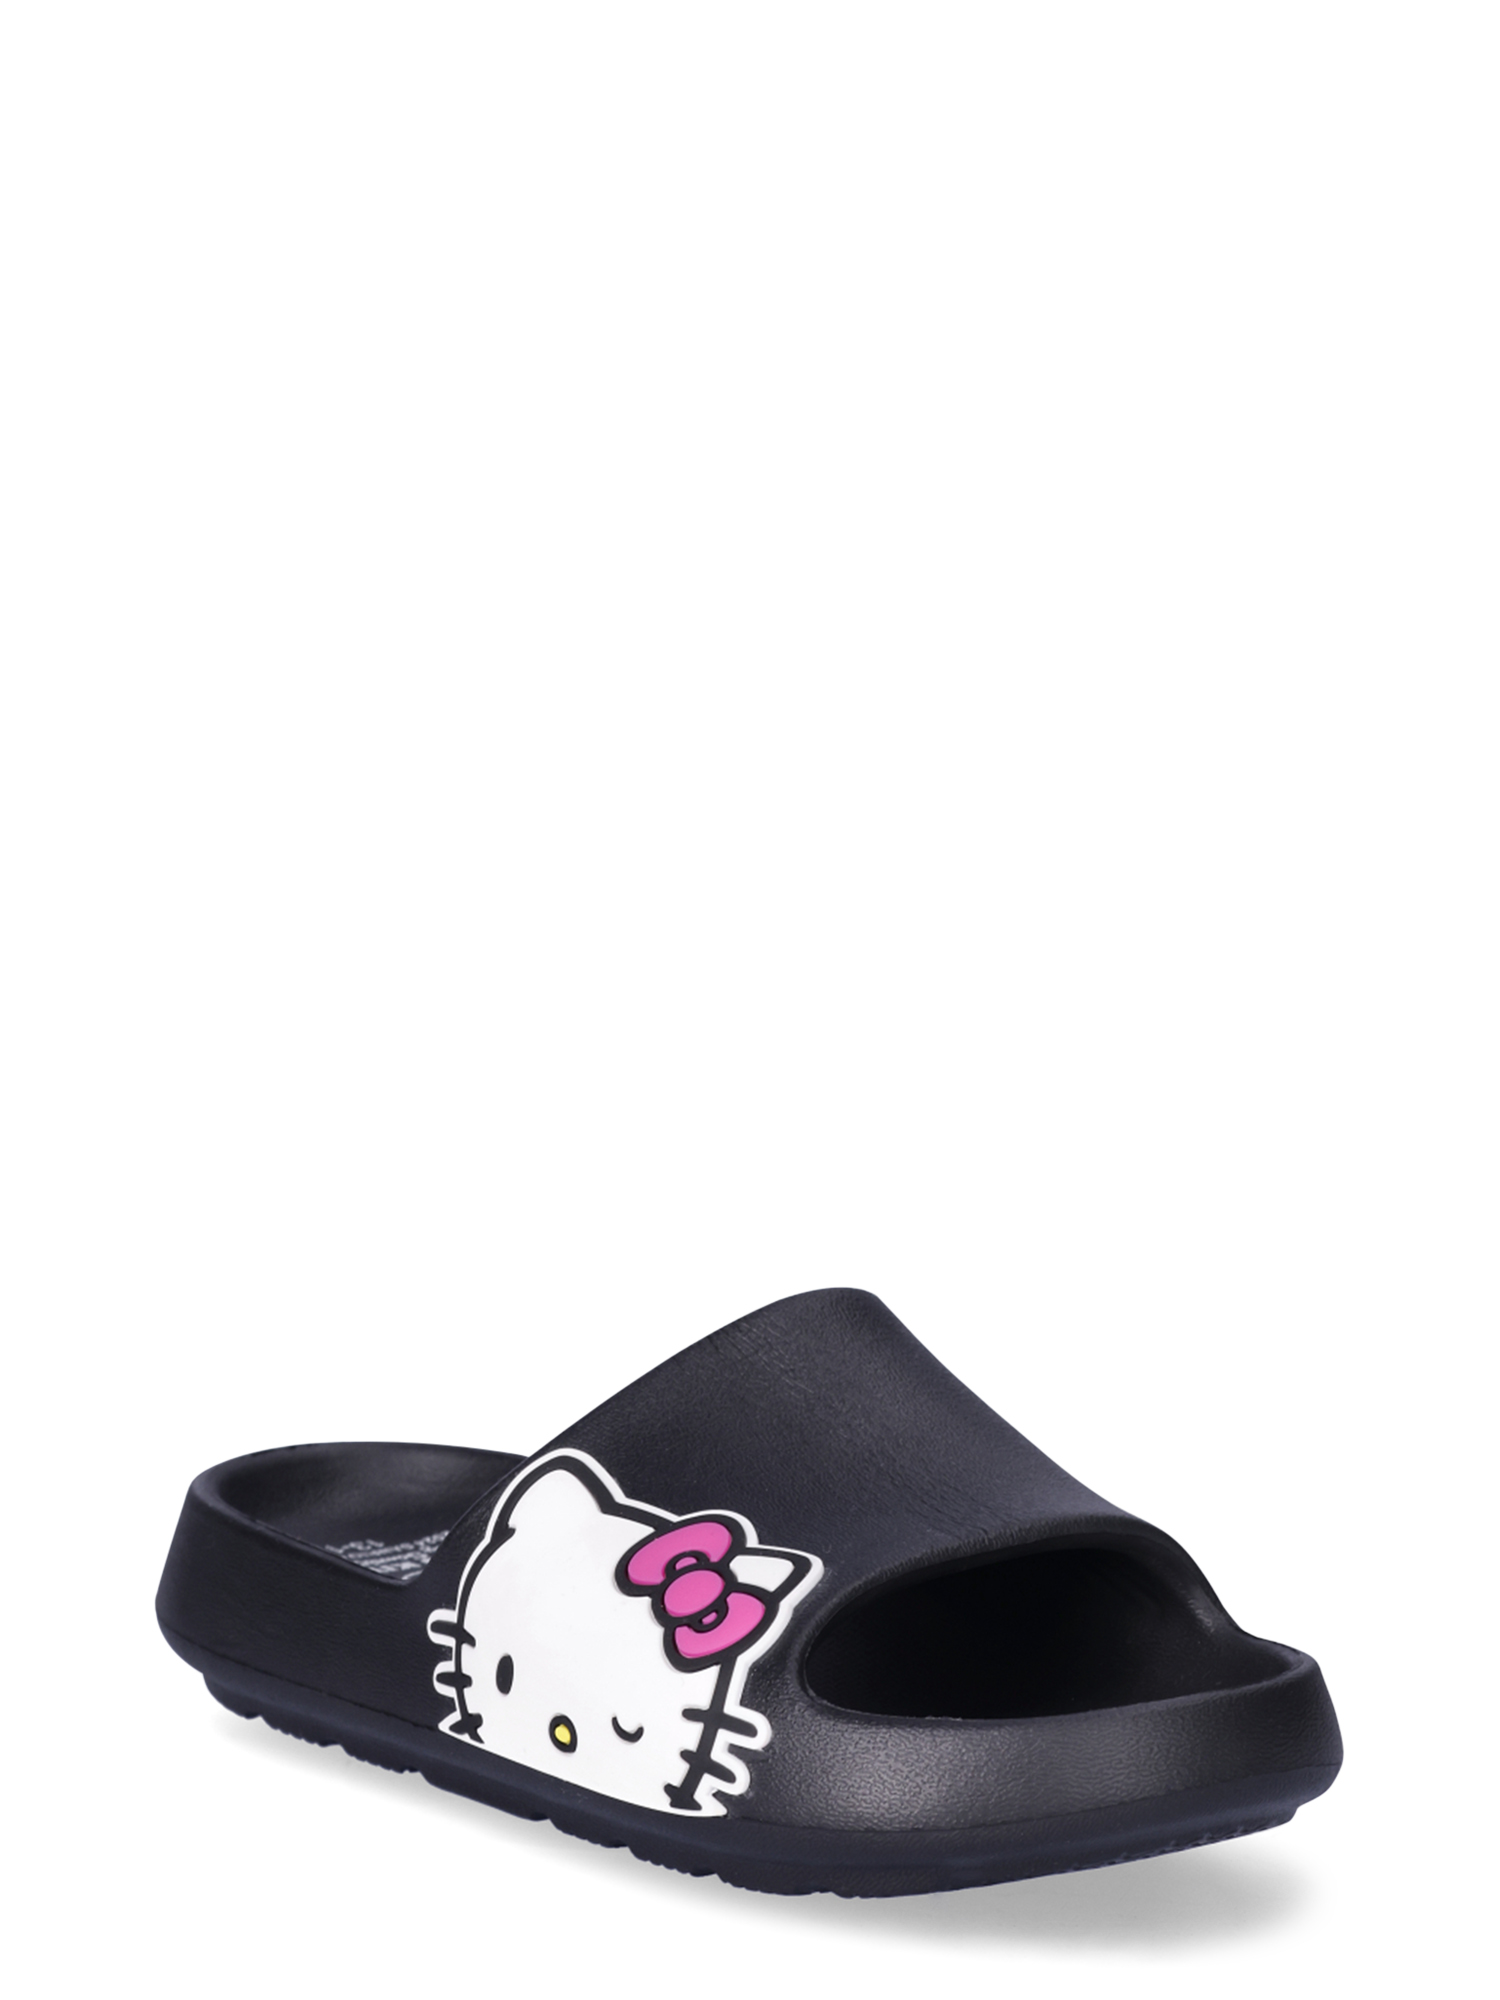 Little and Big Girls Hello Kitty License Slides, Sizes 13-5 - image 1 of 7